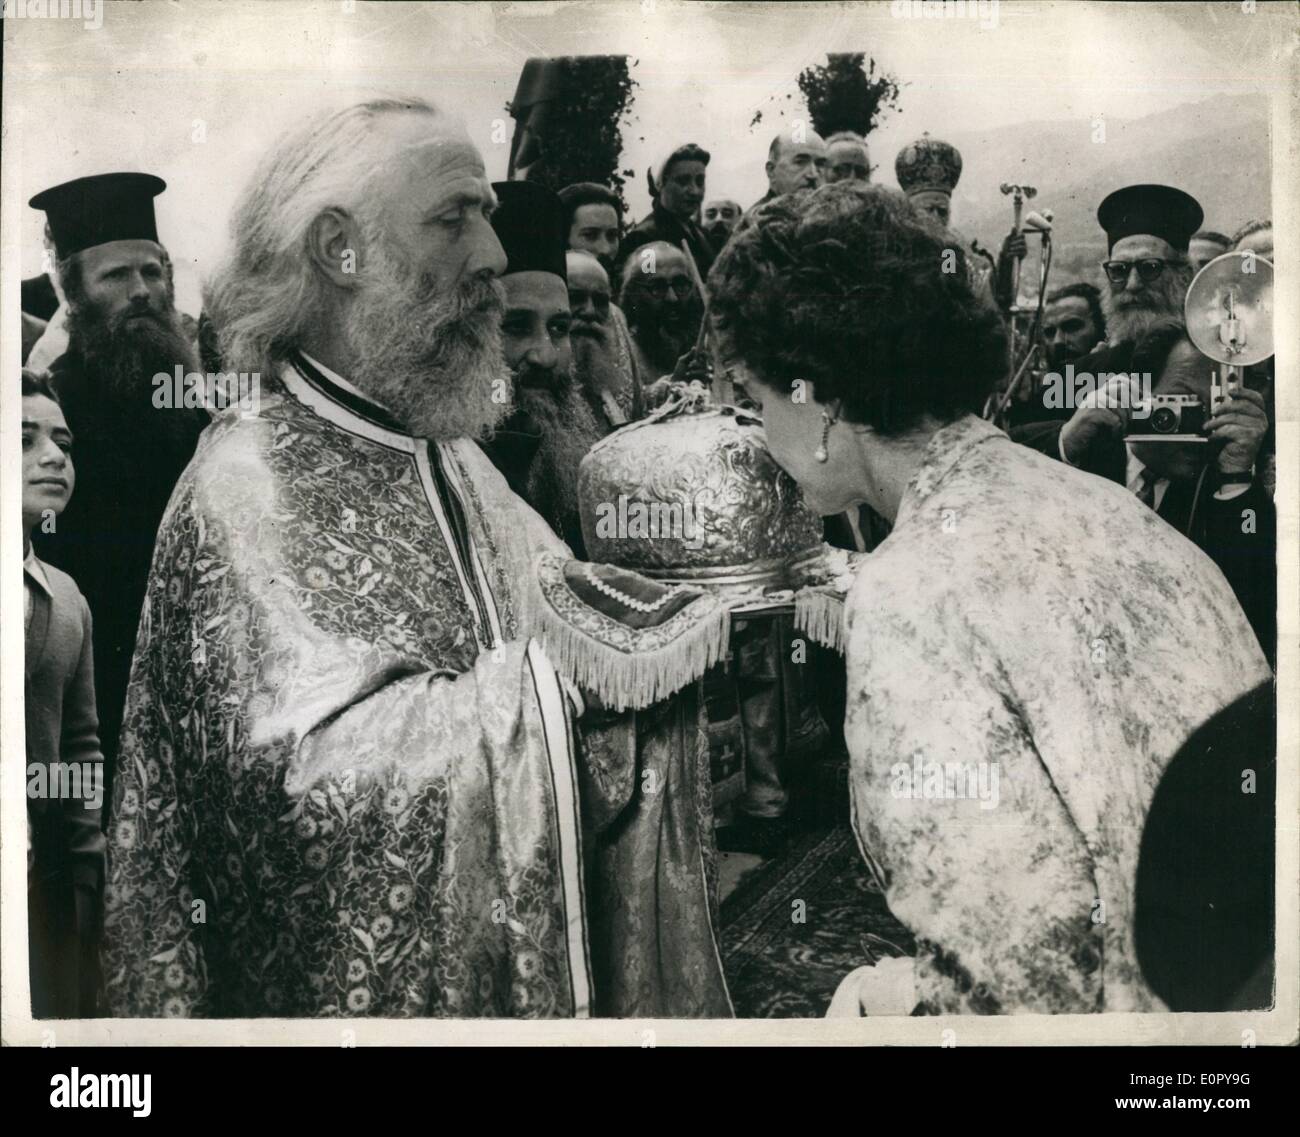 May 05, 1957 - King and Queen of Greece on Spring Tour of the Aegean Islands: King Paul and Queen Frederica of Greece recently carried out their annual Spring Tour of the ancients islands of the Aegean Sea. Photo shows Queen Frederica during to the Island of Mythilene kisses a relic of St. Theodore in the shape of his tiara, presented to her by the Holy Father of St. Theodore Church, during a religious ceremony on the Island. Stock Photo